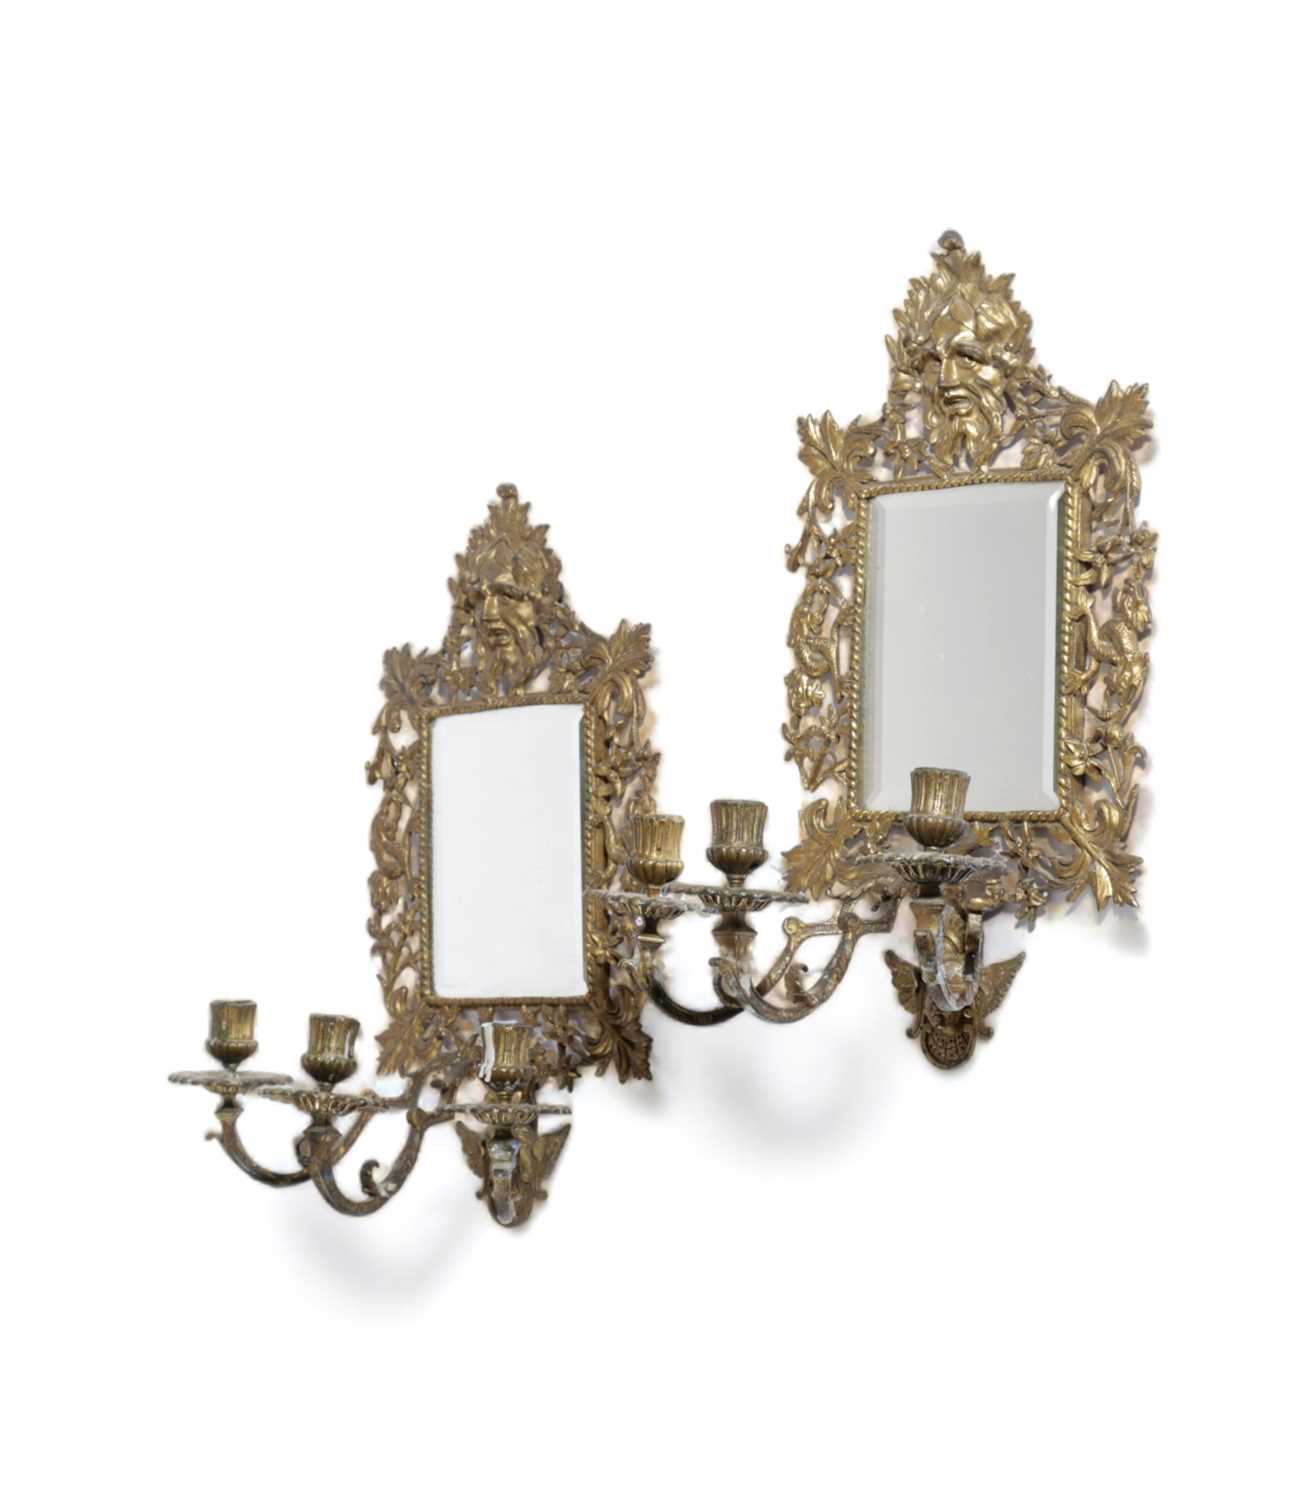 A PAIR OF VICTORIAN GILT BRASS WALL MIRRORS PROBABLY IRISH, MID-19TH CENTURY each with a bevelled